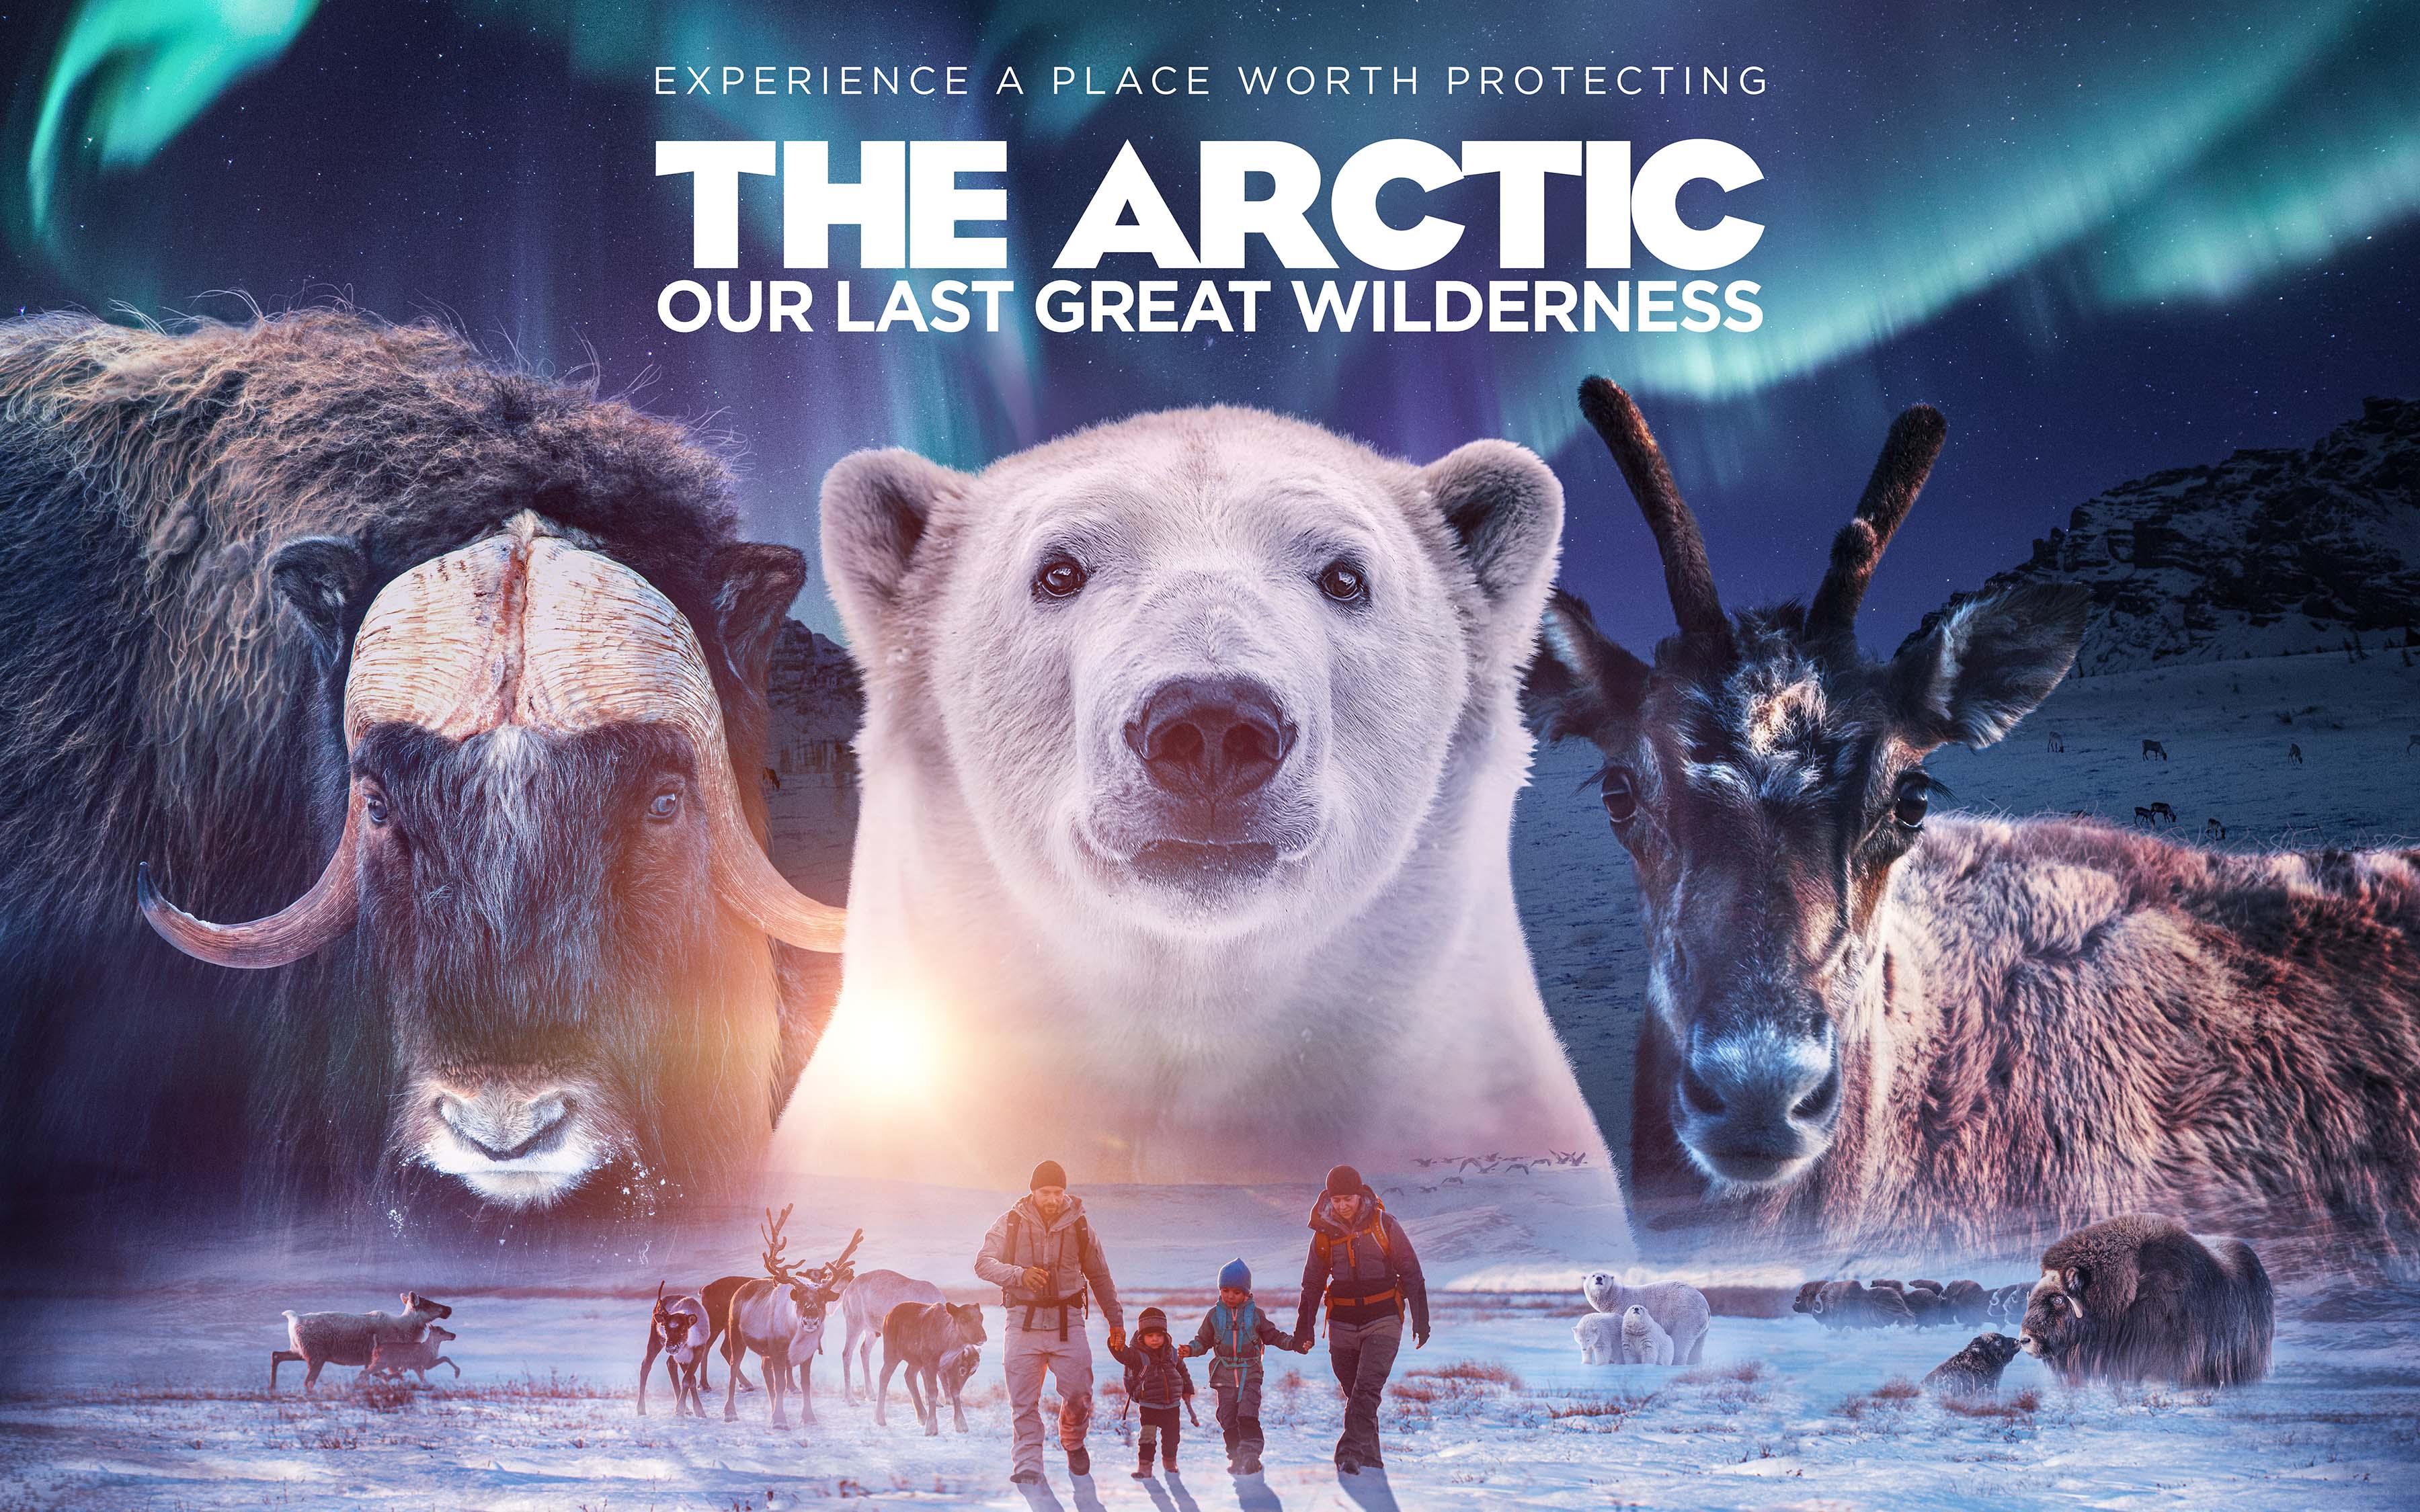 Experience ‘The Arctic: Our Last Great Wilderness’ when it opens at the Science Center on Dec. 8